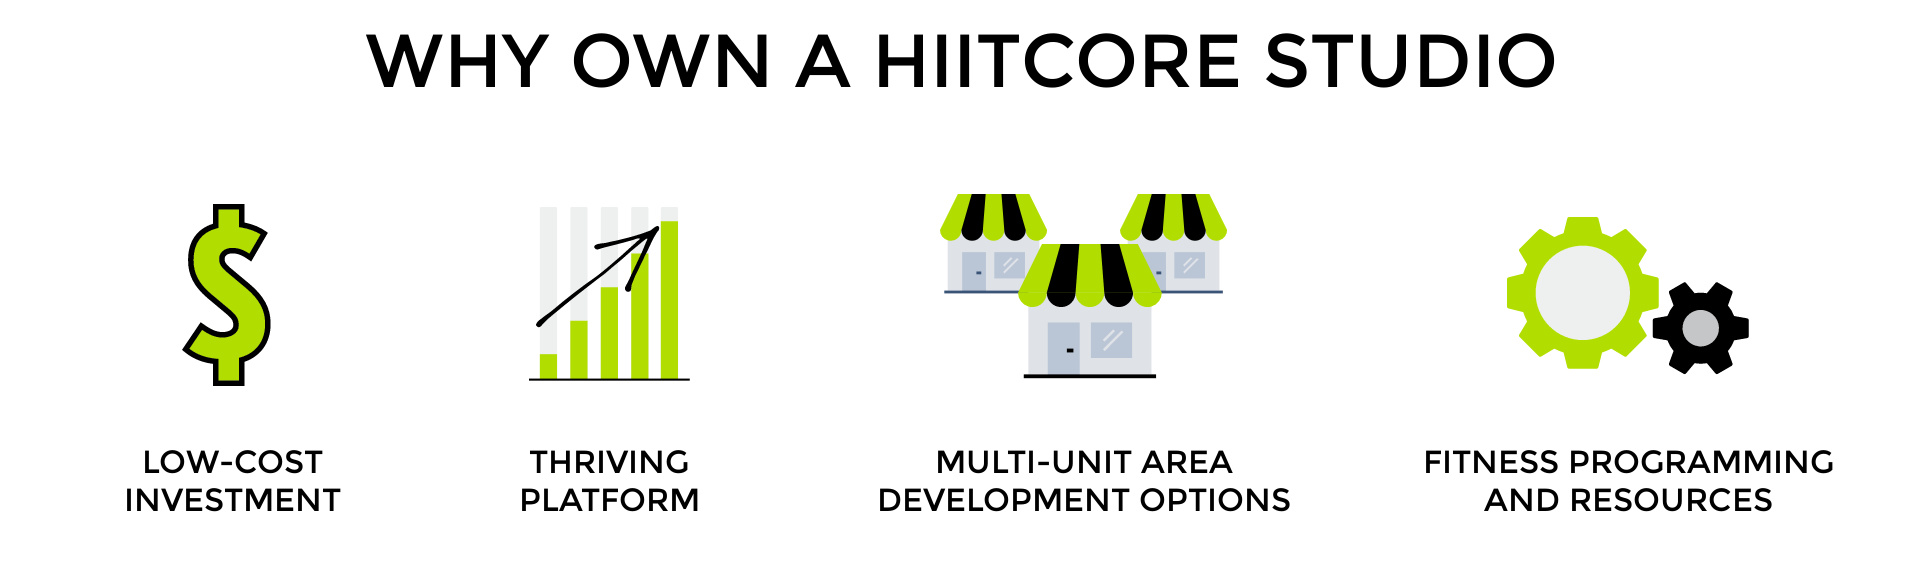 Why own a HIITCore Studio image detailing important key factors including low-cost investment, thriving platform, multi-unit area development options, fitness programming and resources.